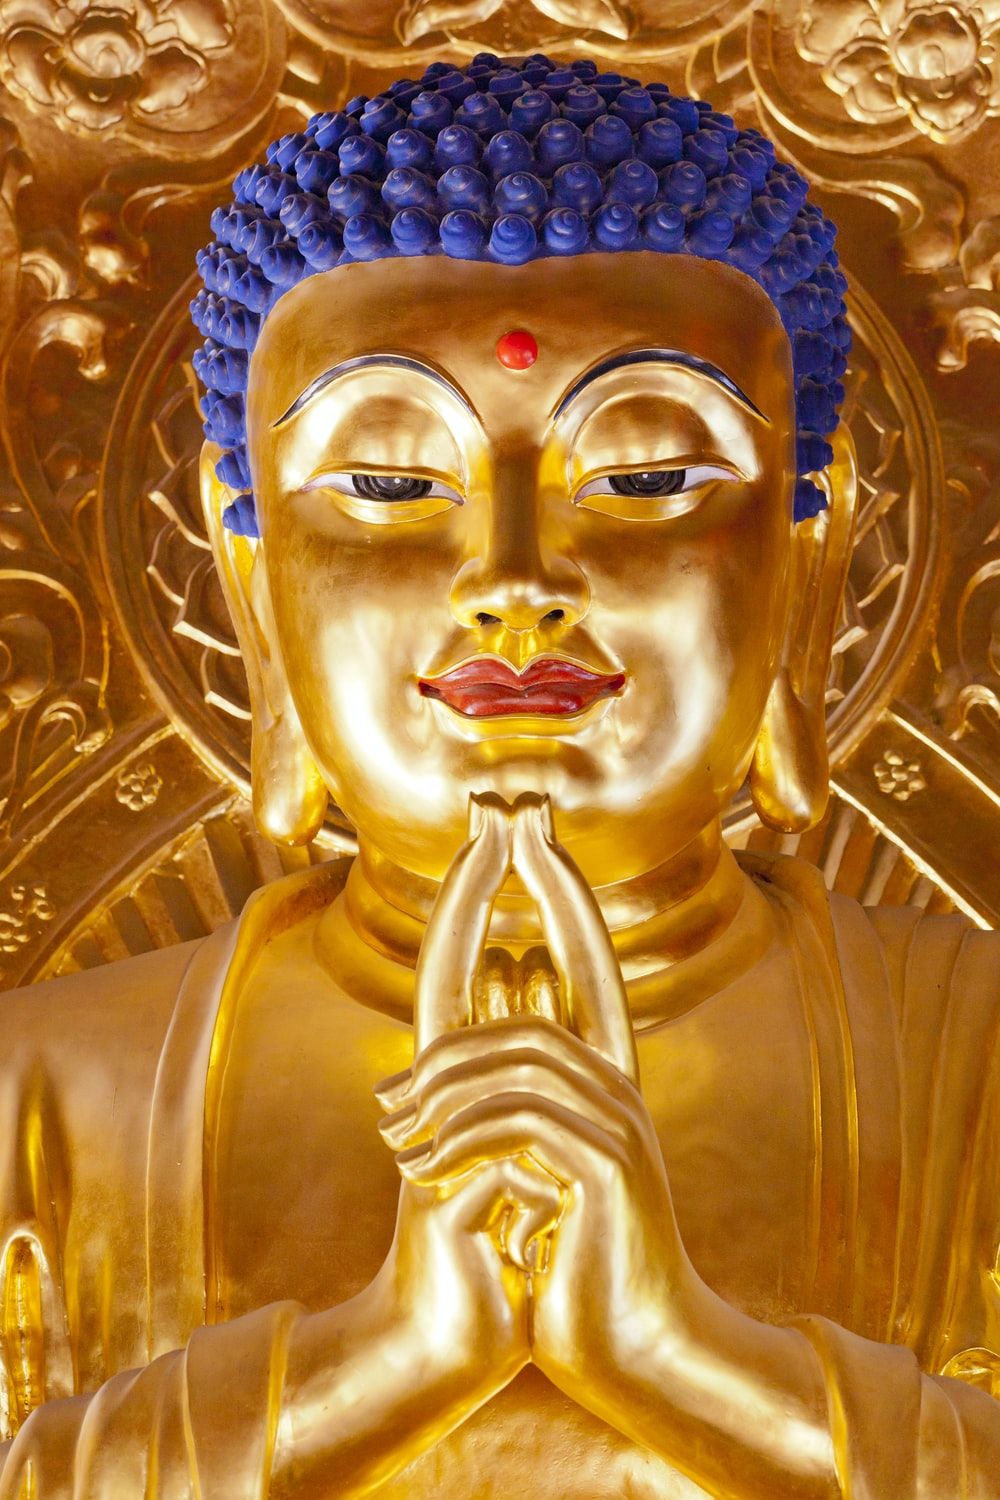 Golden Buddha Picture. Download Free Image